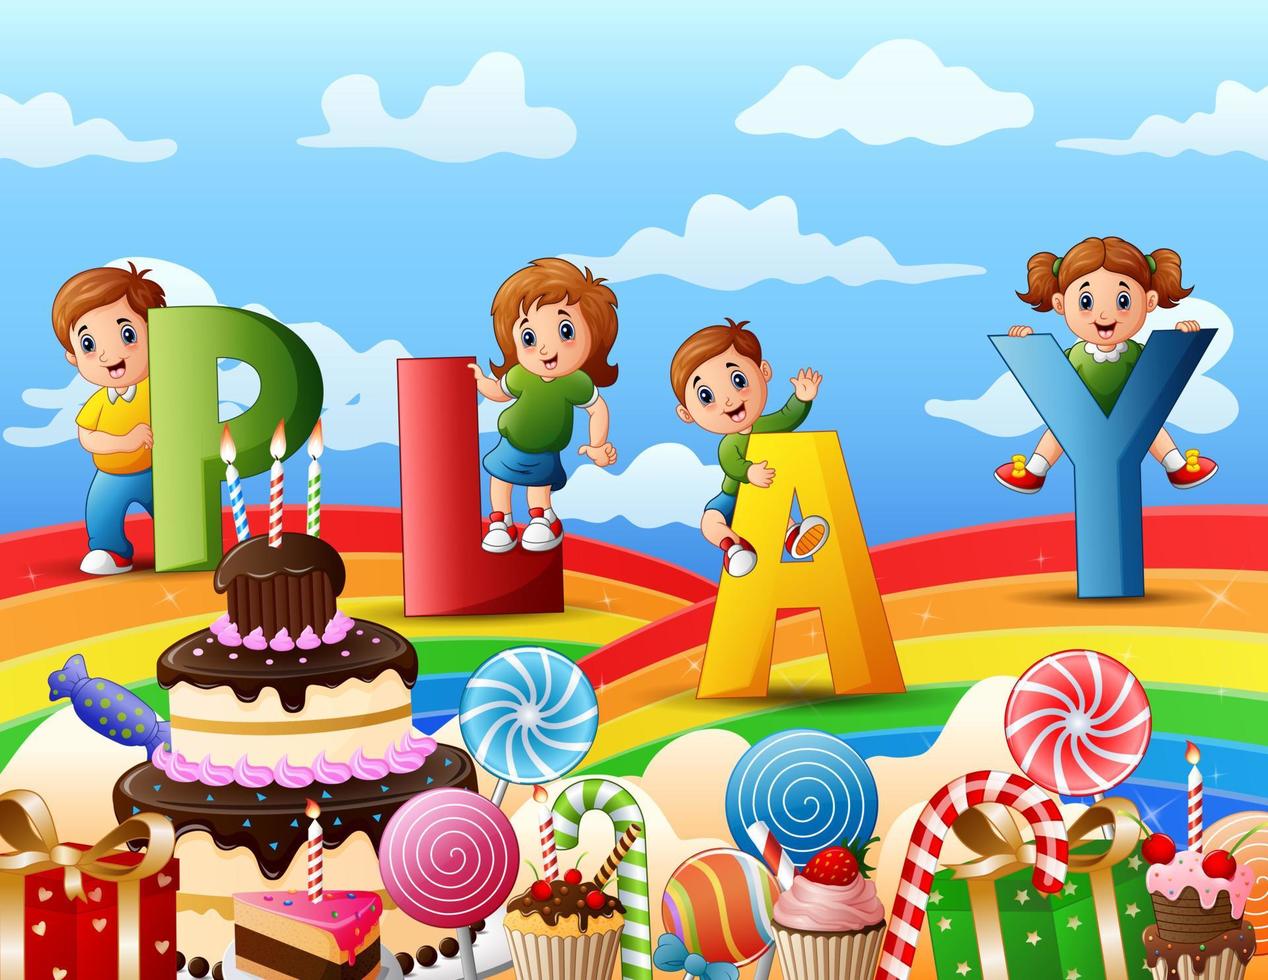 Cartoon children playing in a sweet land illustration vector